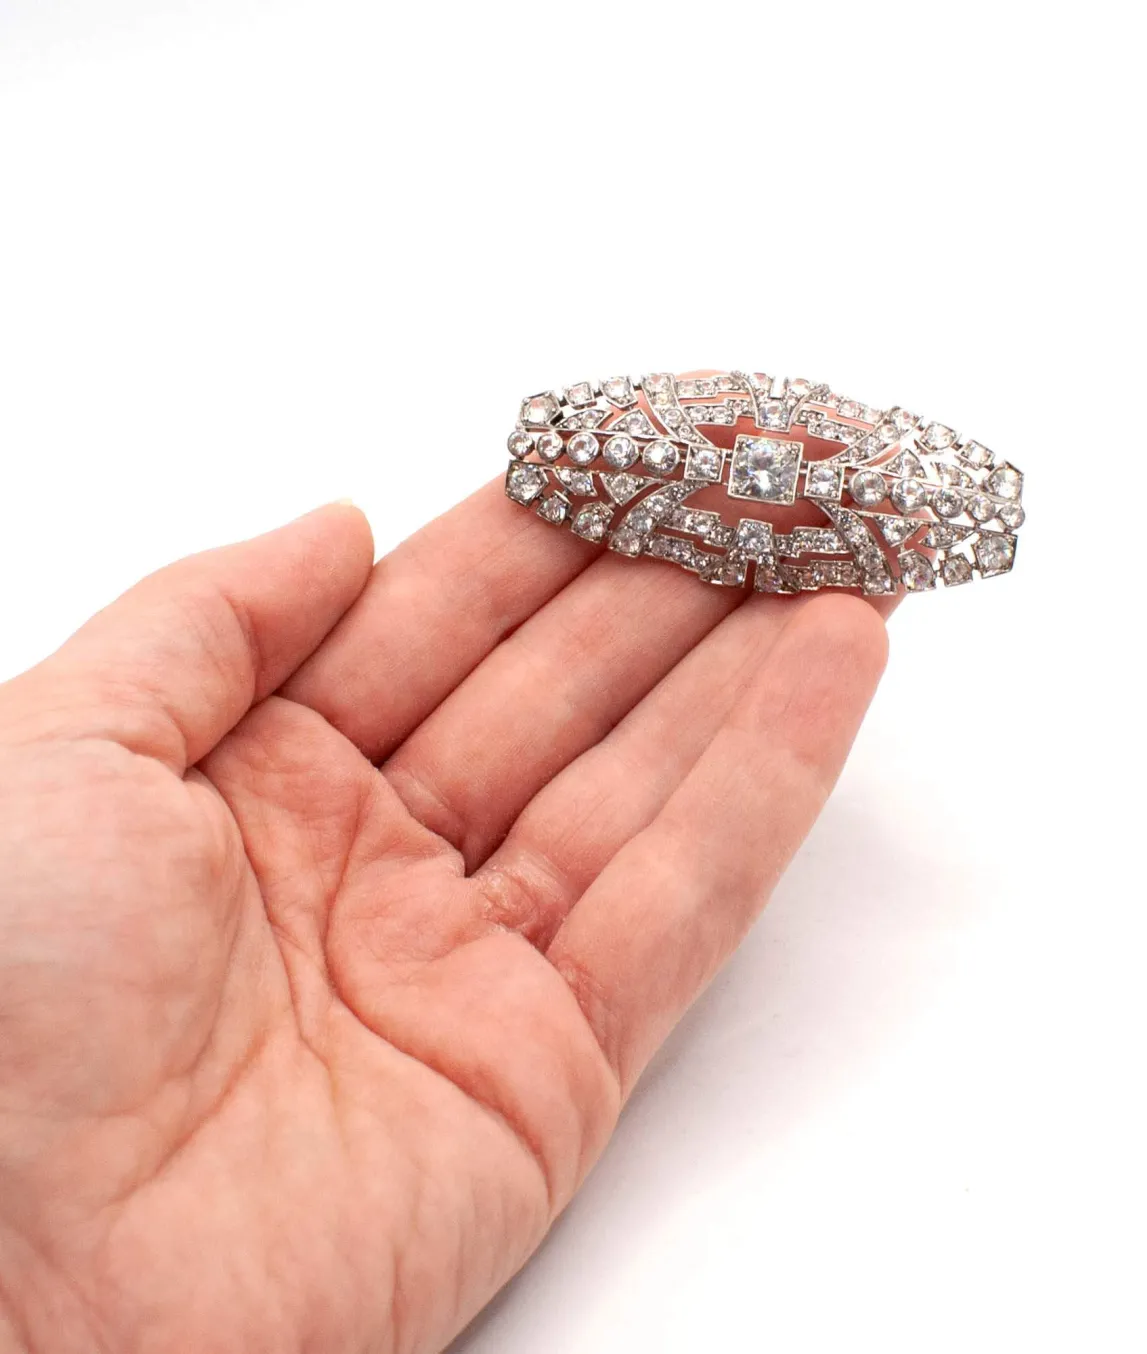 1930s silver and zircon brooch held in a hand